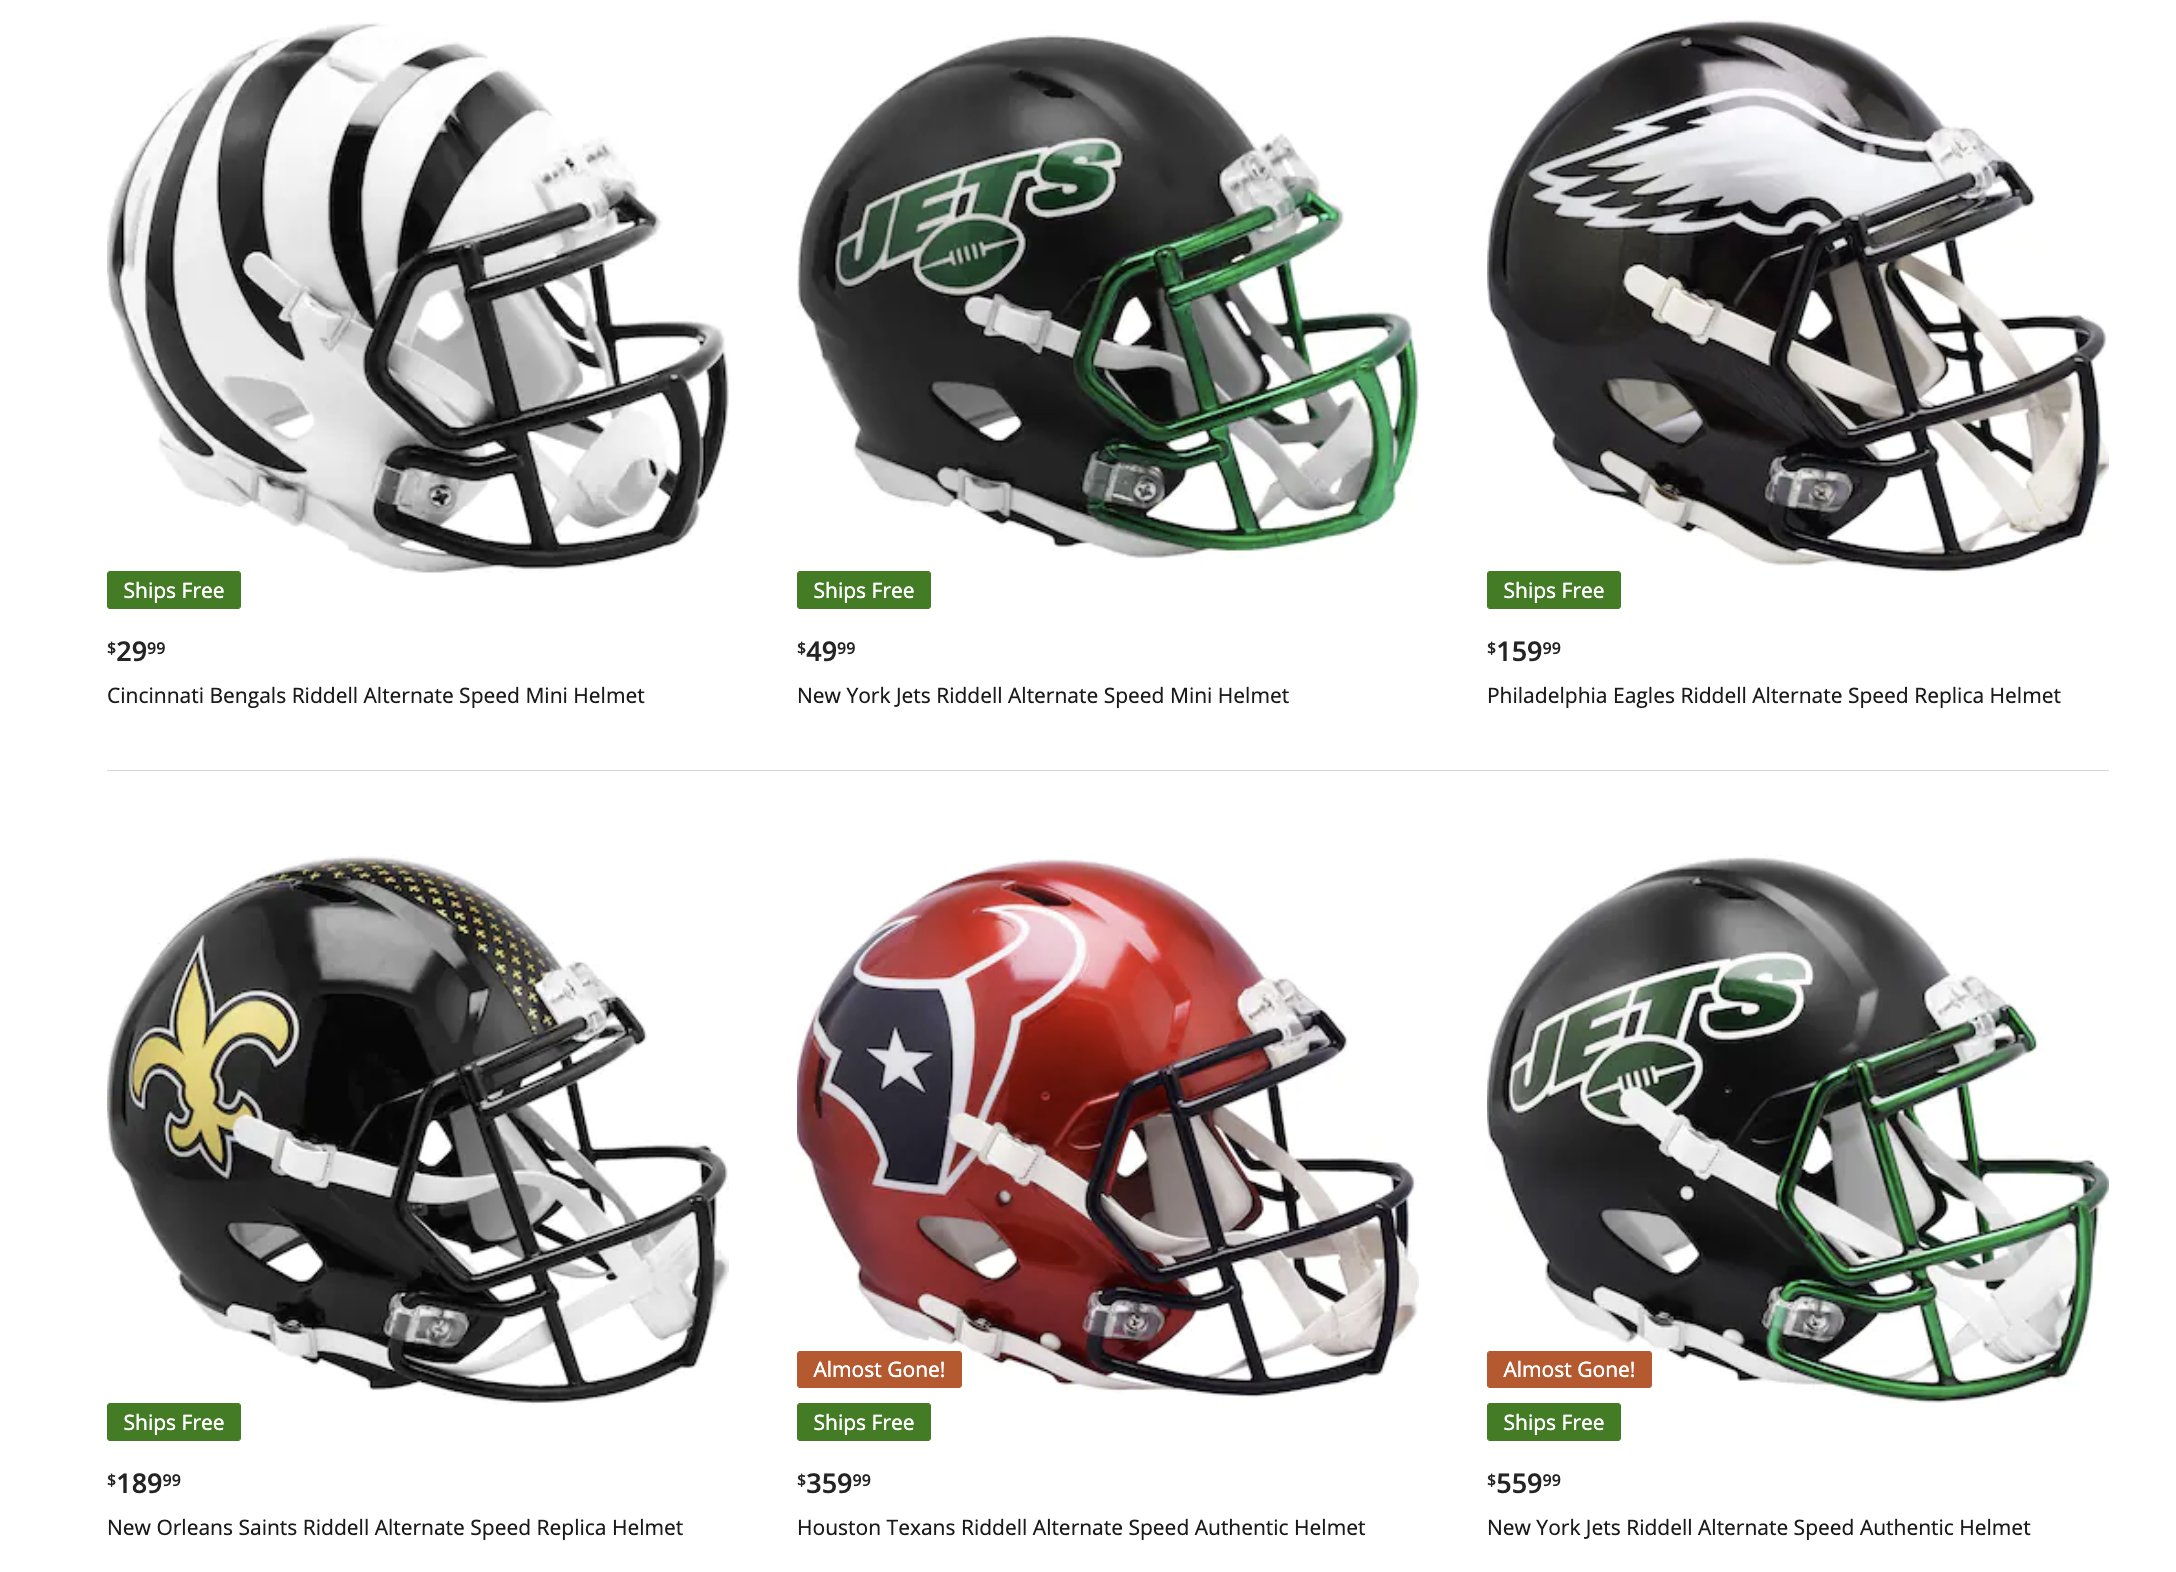 klippe der ovre rendering Chris Creamer on Twitter: "SHOP: The NFL's alternate helmet collection from  Riddell is now available. Ten teams in four different models ranging from  the mini helmets all the way up to the "